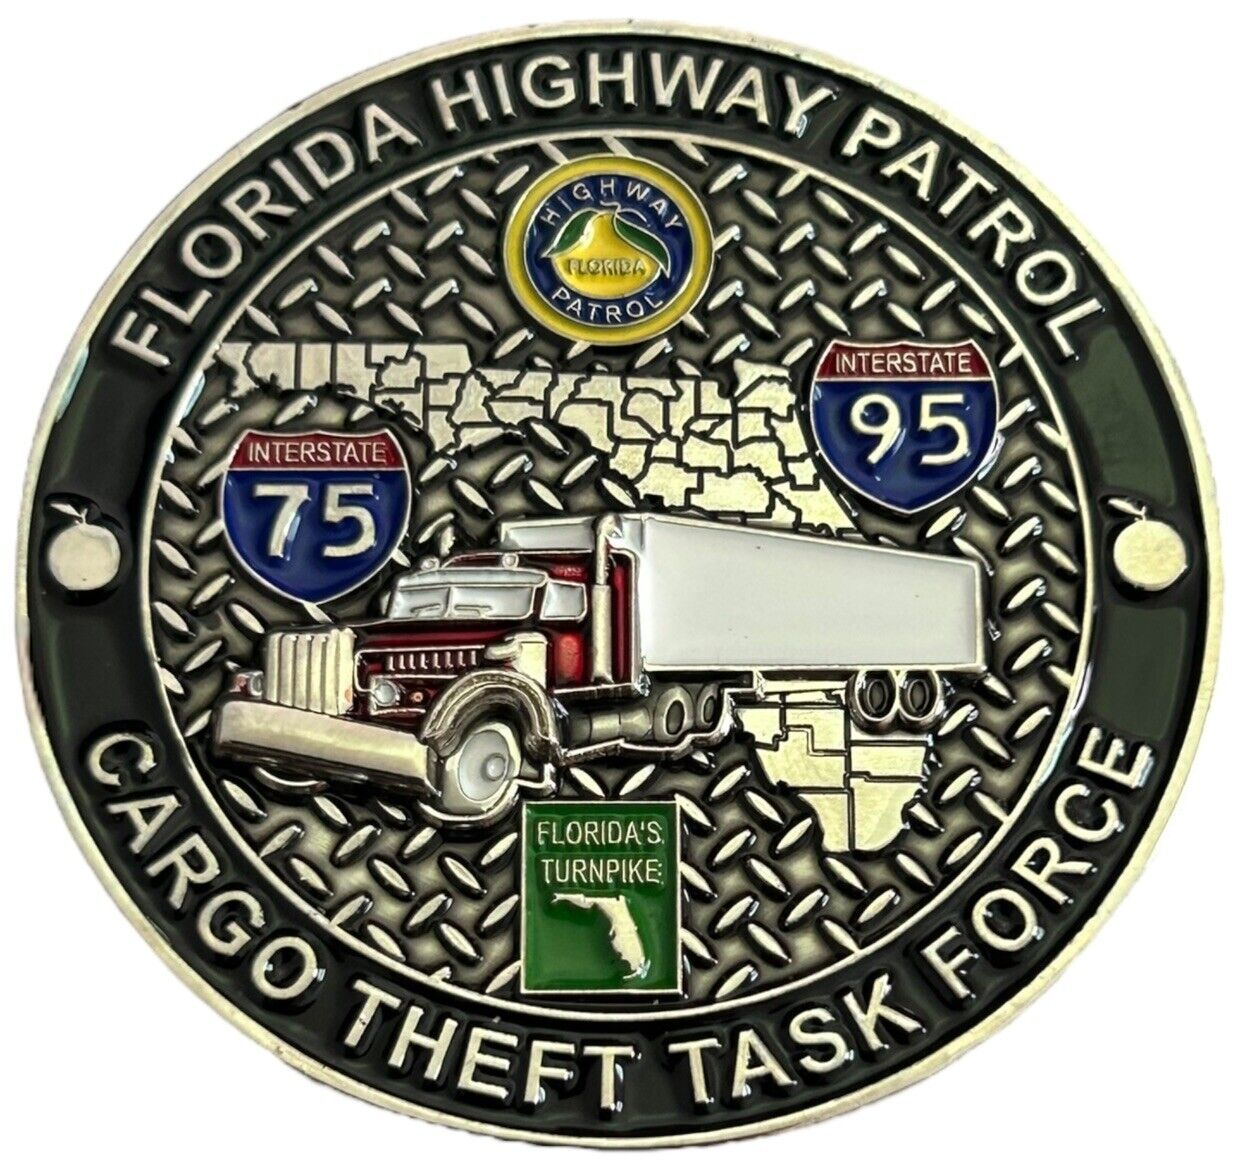 Florida Highway Patrol Cargo Theft Task Force Challenge Coin FHP State Trooper